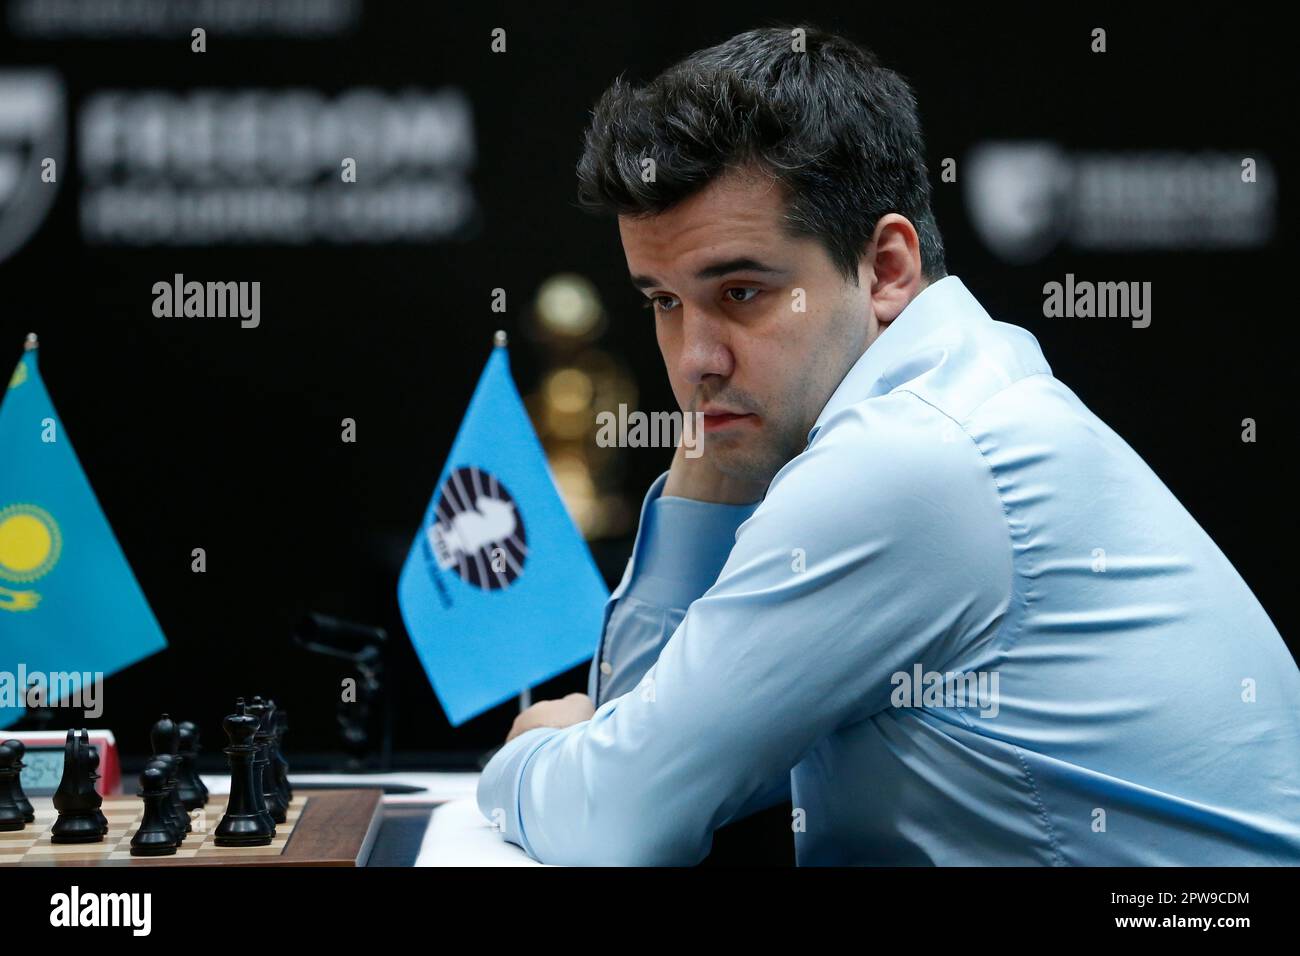 Russia's Ian Nepomniachtchi plays against China's Ding Liren during their  FIDE World Chess Championship in Astana, Kazakhstan, Saturday, April 29,  2023. Ian Nepomniachtchi and Ding Liren are facing off in the final